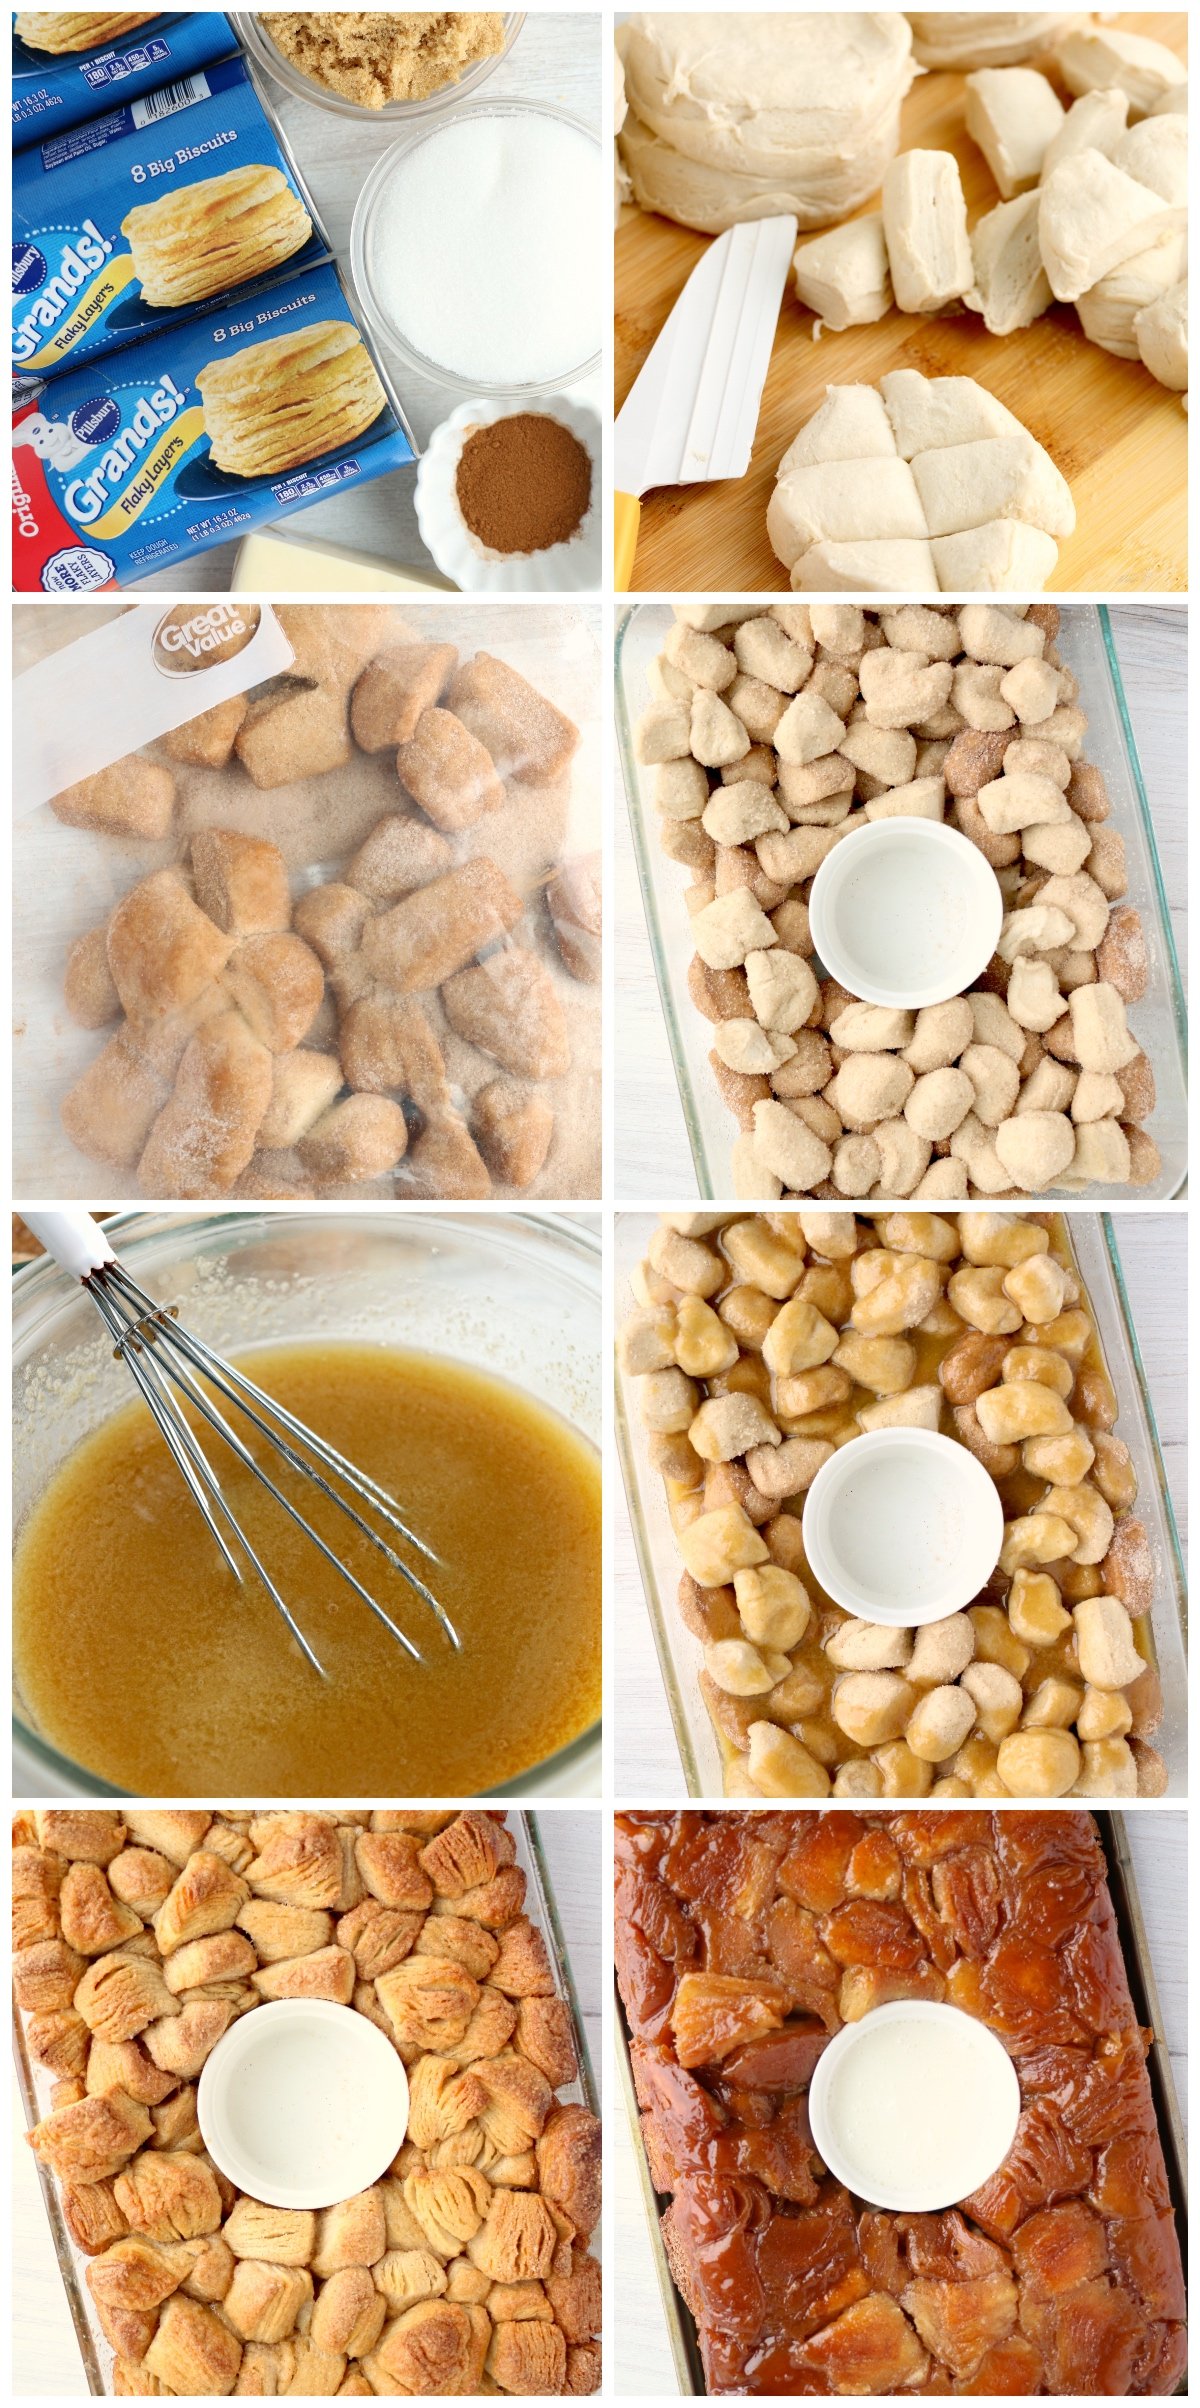 how to make monkey bread step by step photo instructions